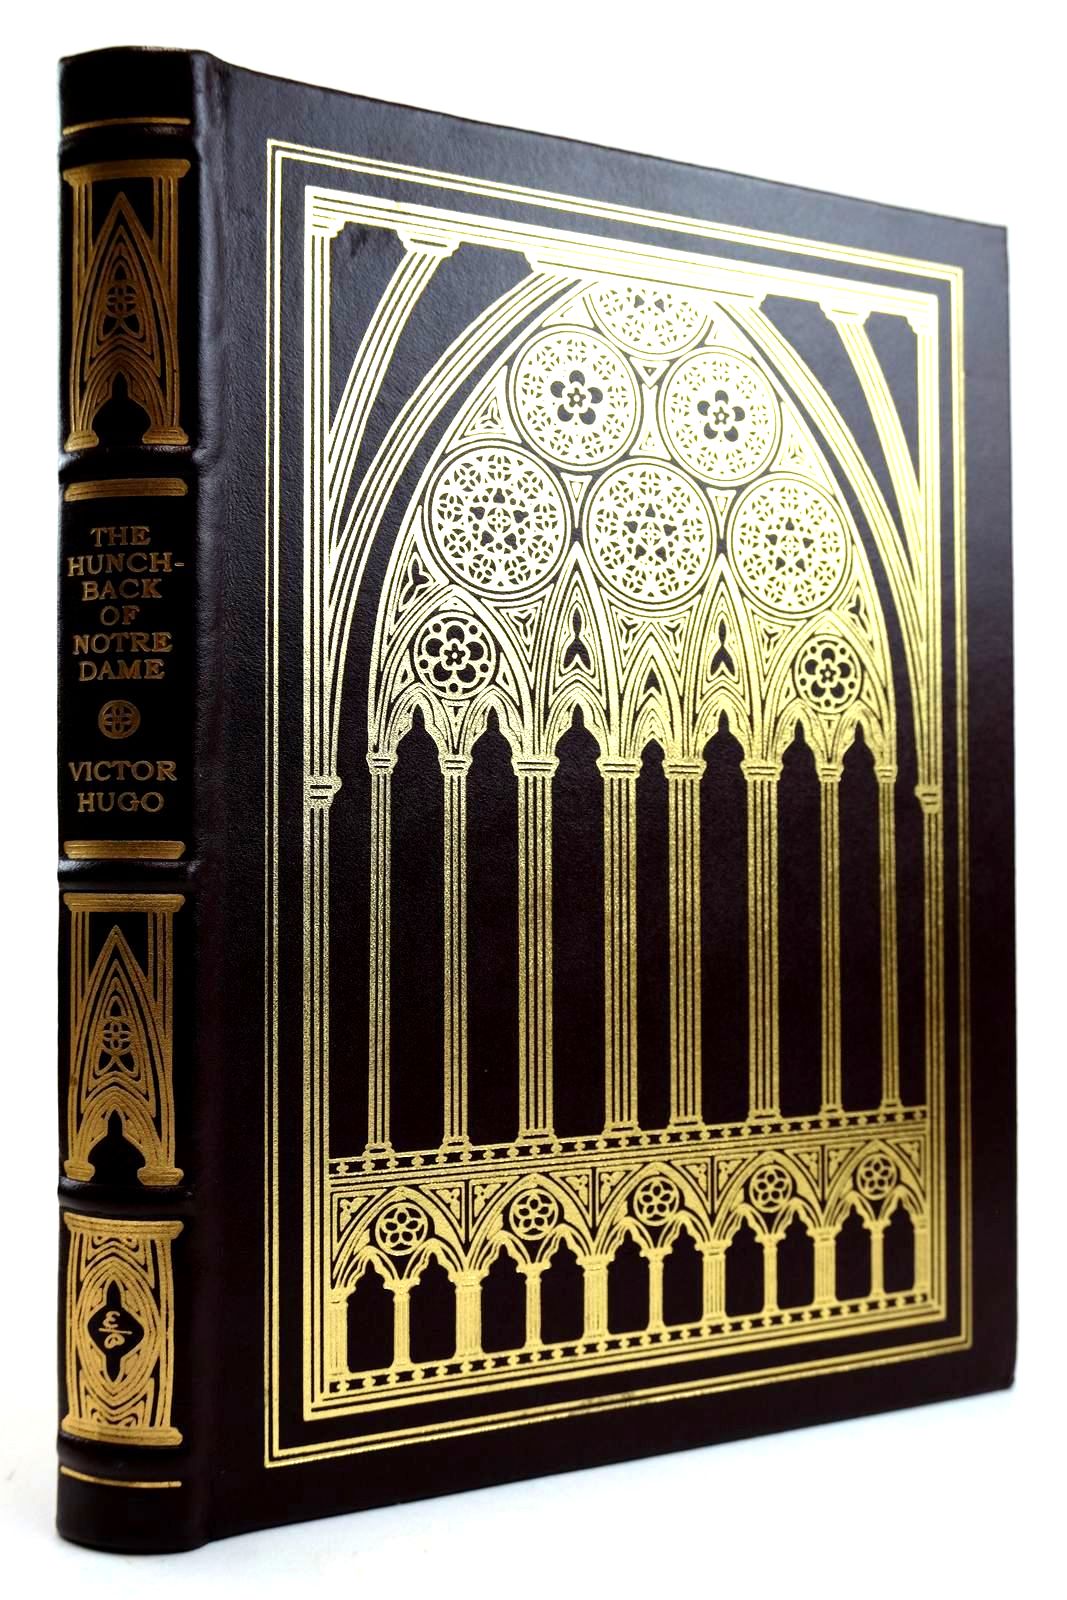 Photo of THE HUNCHBACK OF NOTRE DAME written by Hugo, Victor illustrated by Lamotte, Bernard published by Easton Press (STOCK CODE: 2132009)  for sale by Stella & Rose's Books